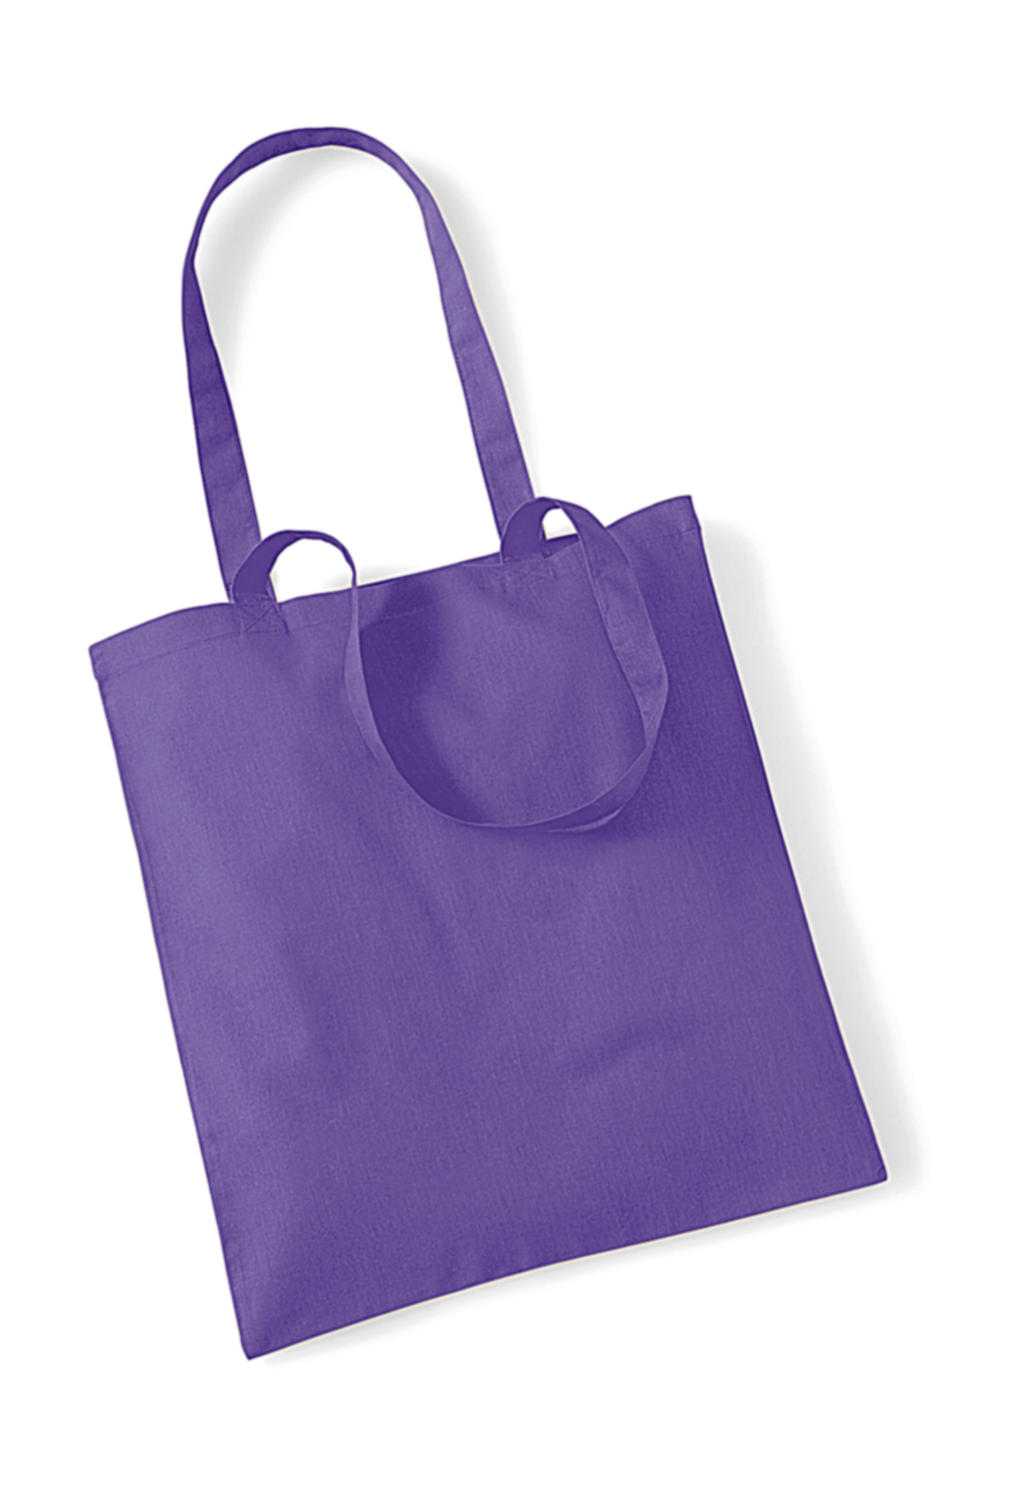  Bag for Life - Long Handles in Farbe Violet